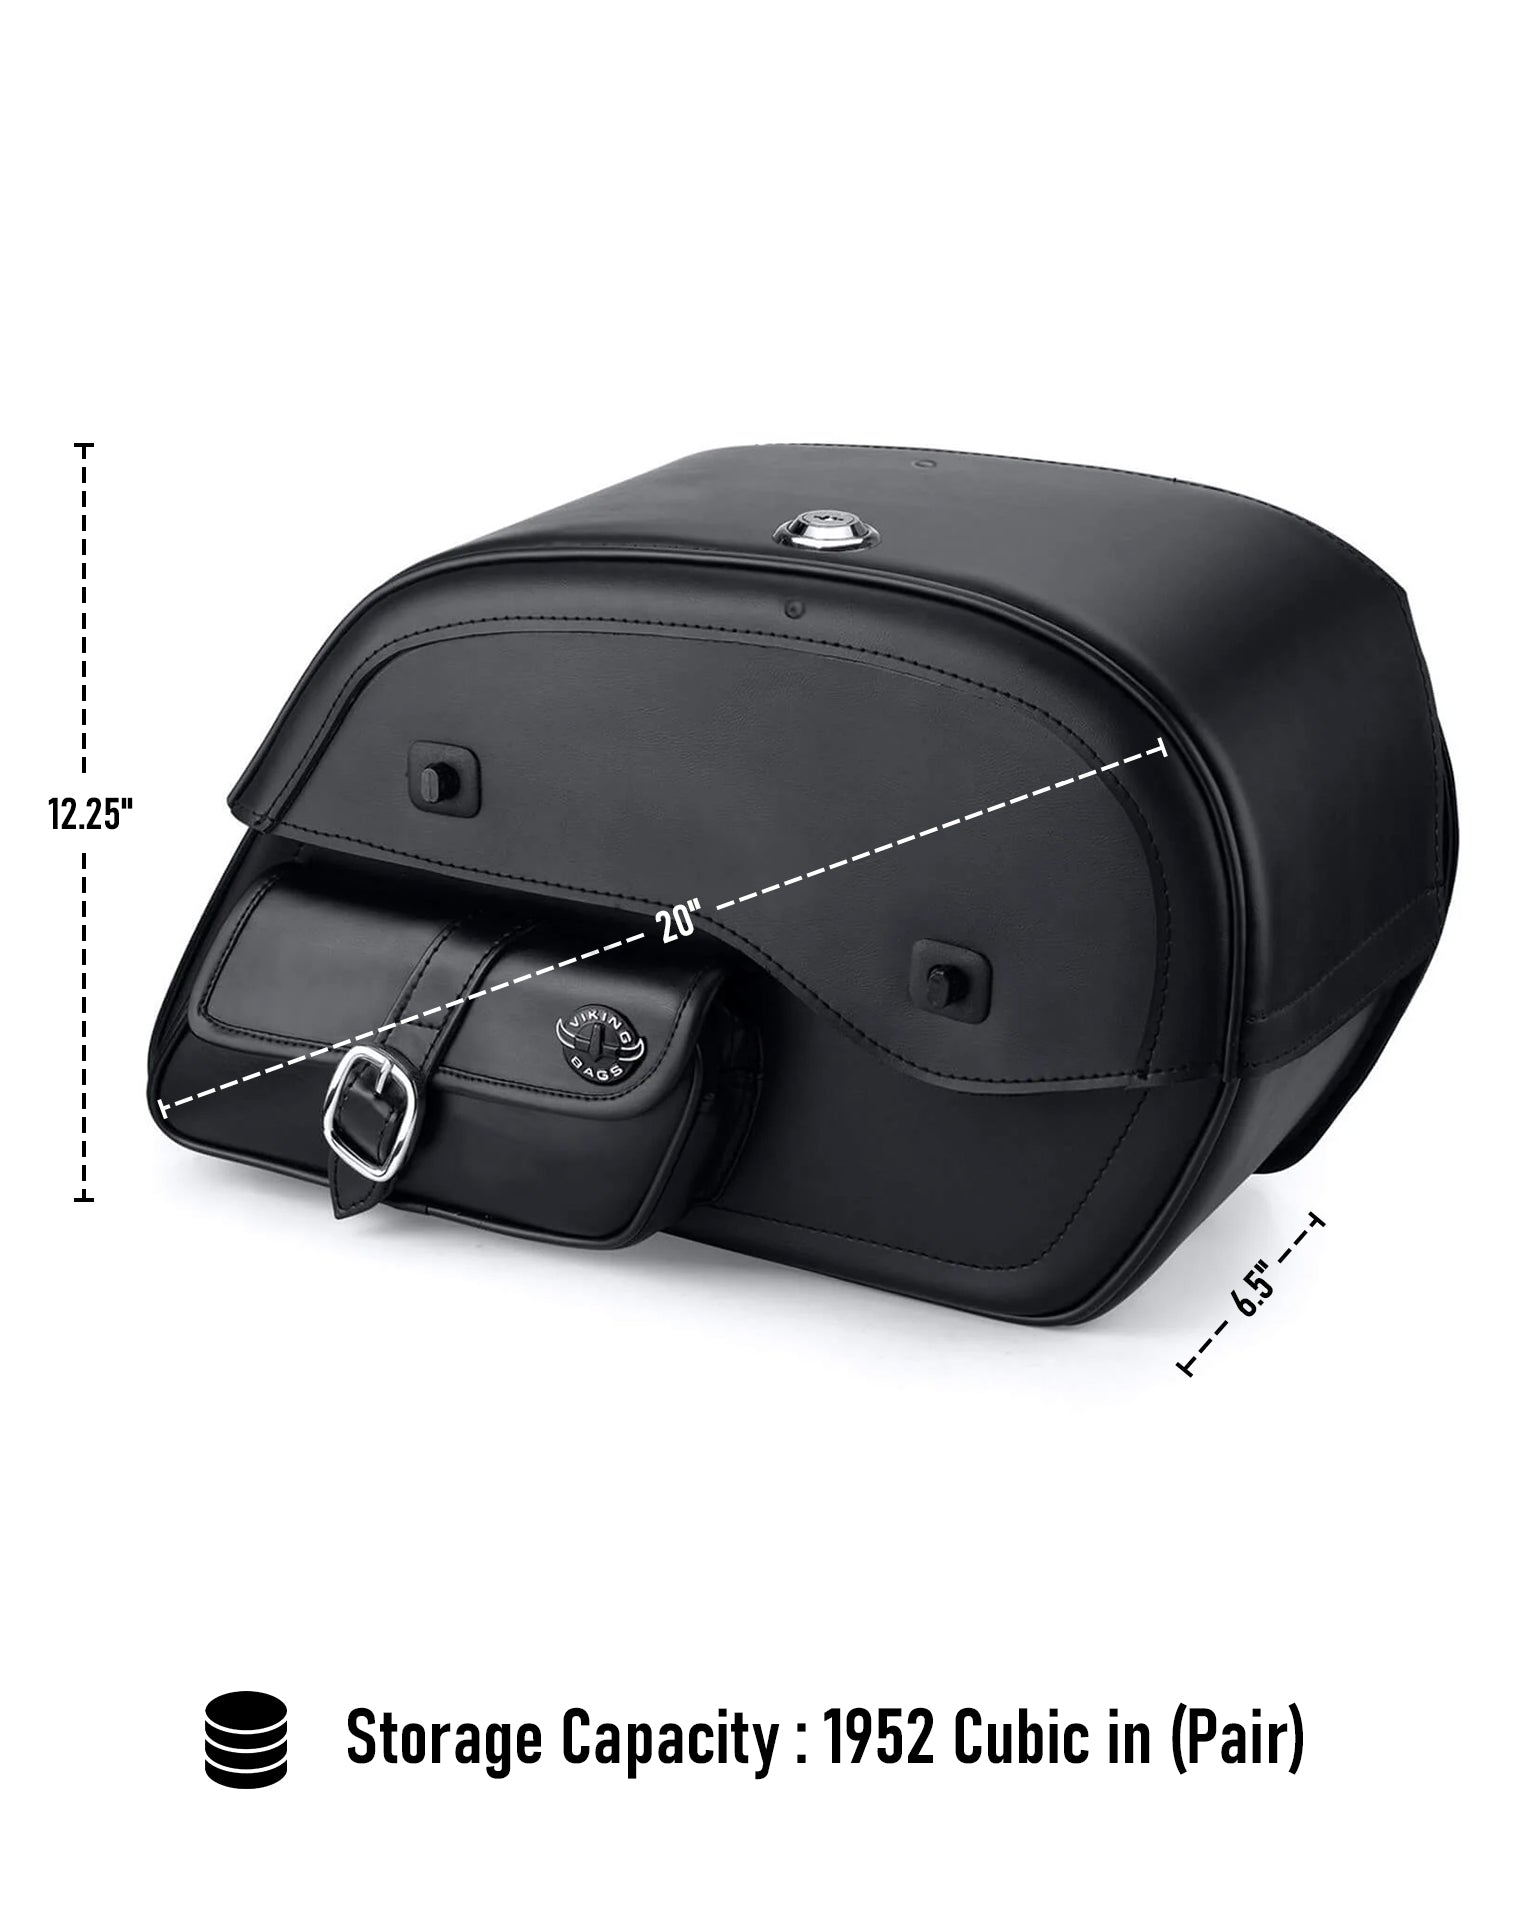 Viking Essential Side Pocket Large Yamaha V Star 950 Leather Motorcycle Saddlebags Can Store Your Ridings Gears